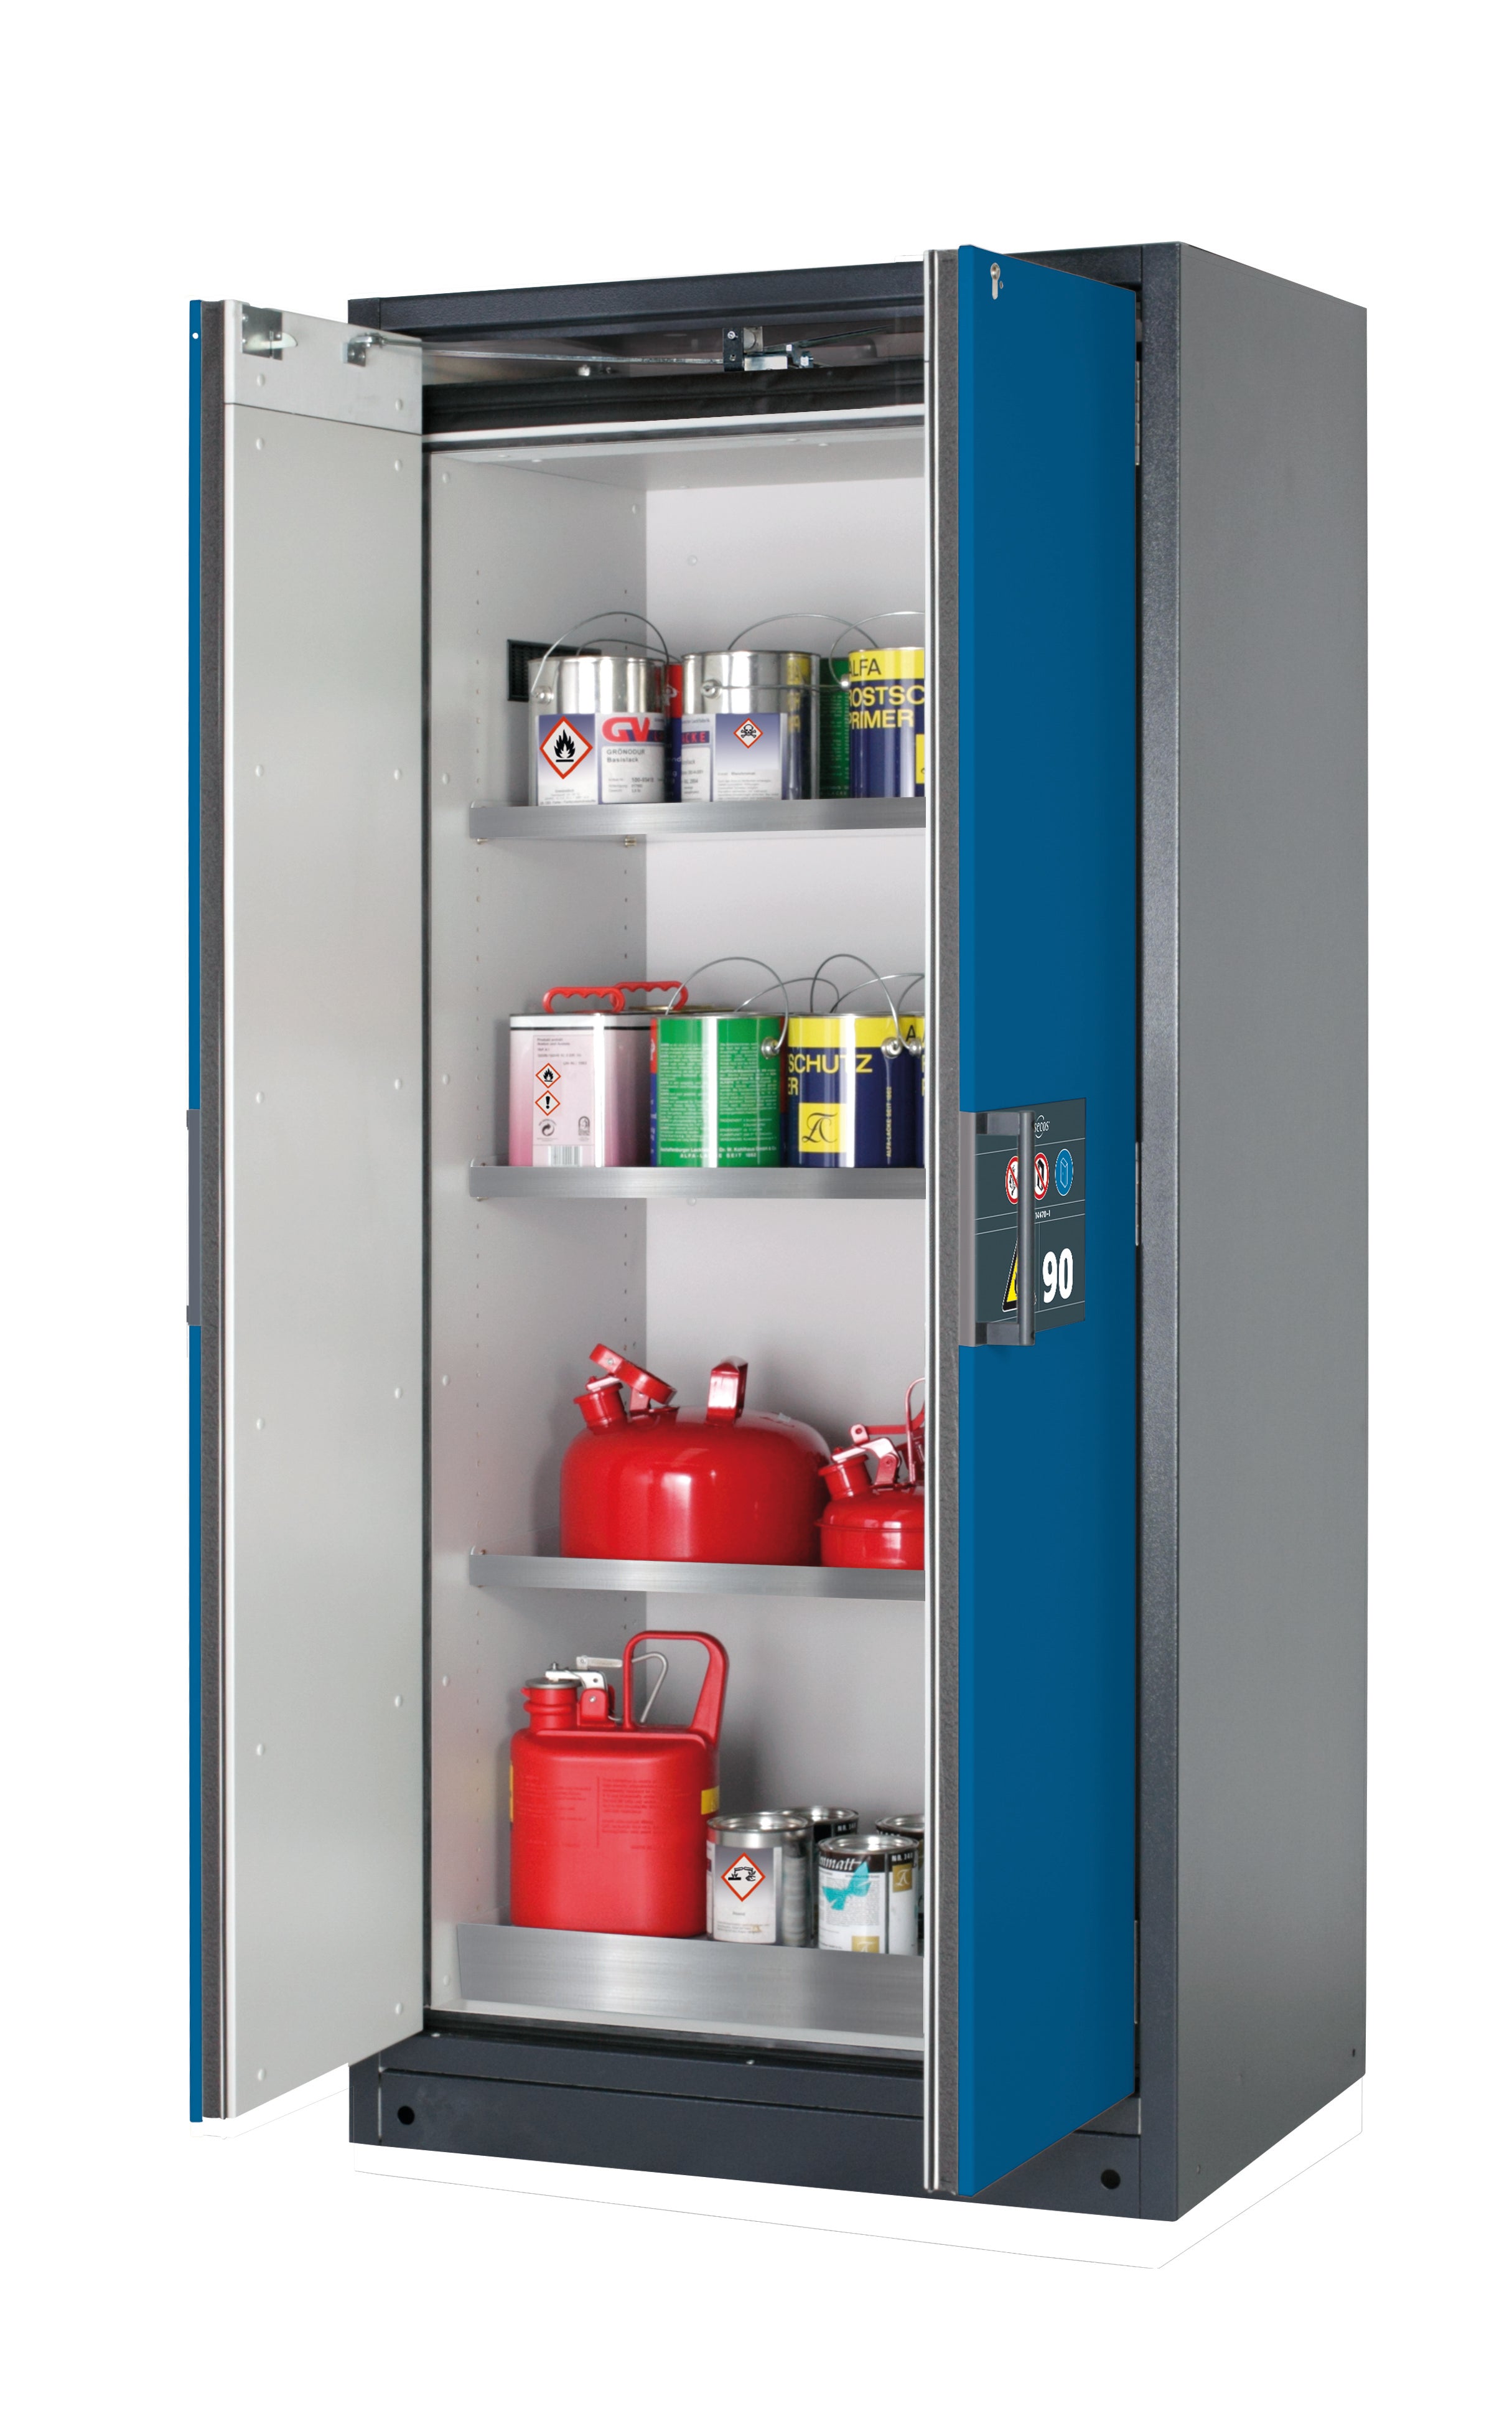 Type 90 safety storage cabinet Q-PEGASUS-90 model Q90.195.090.WDAC in gentian blue RAL 5010 with 3x shelf standard (stainless steel 1.4301),